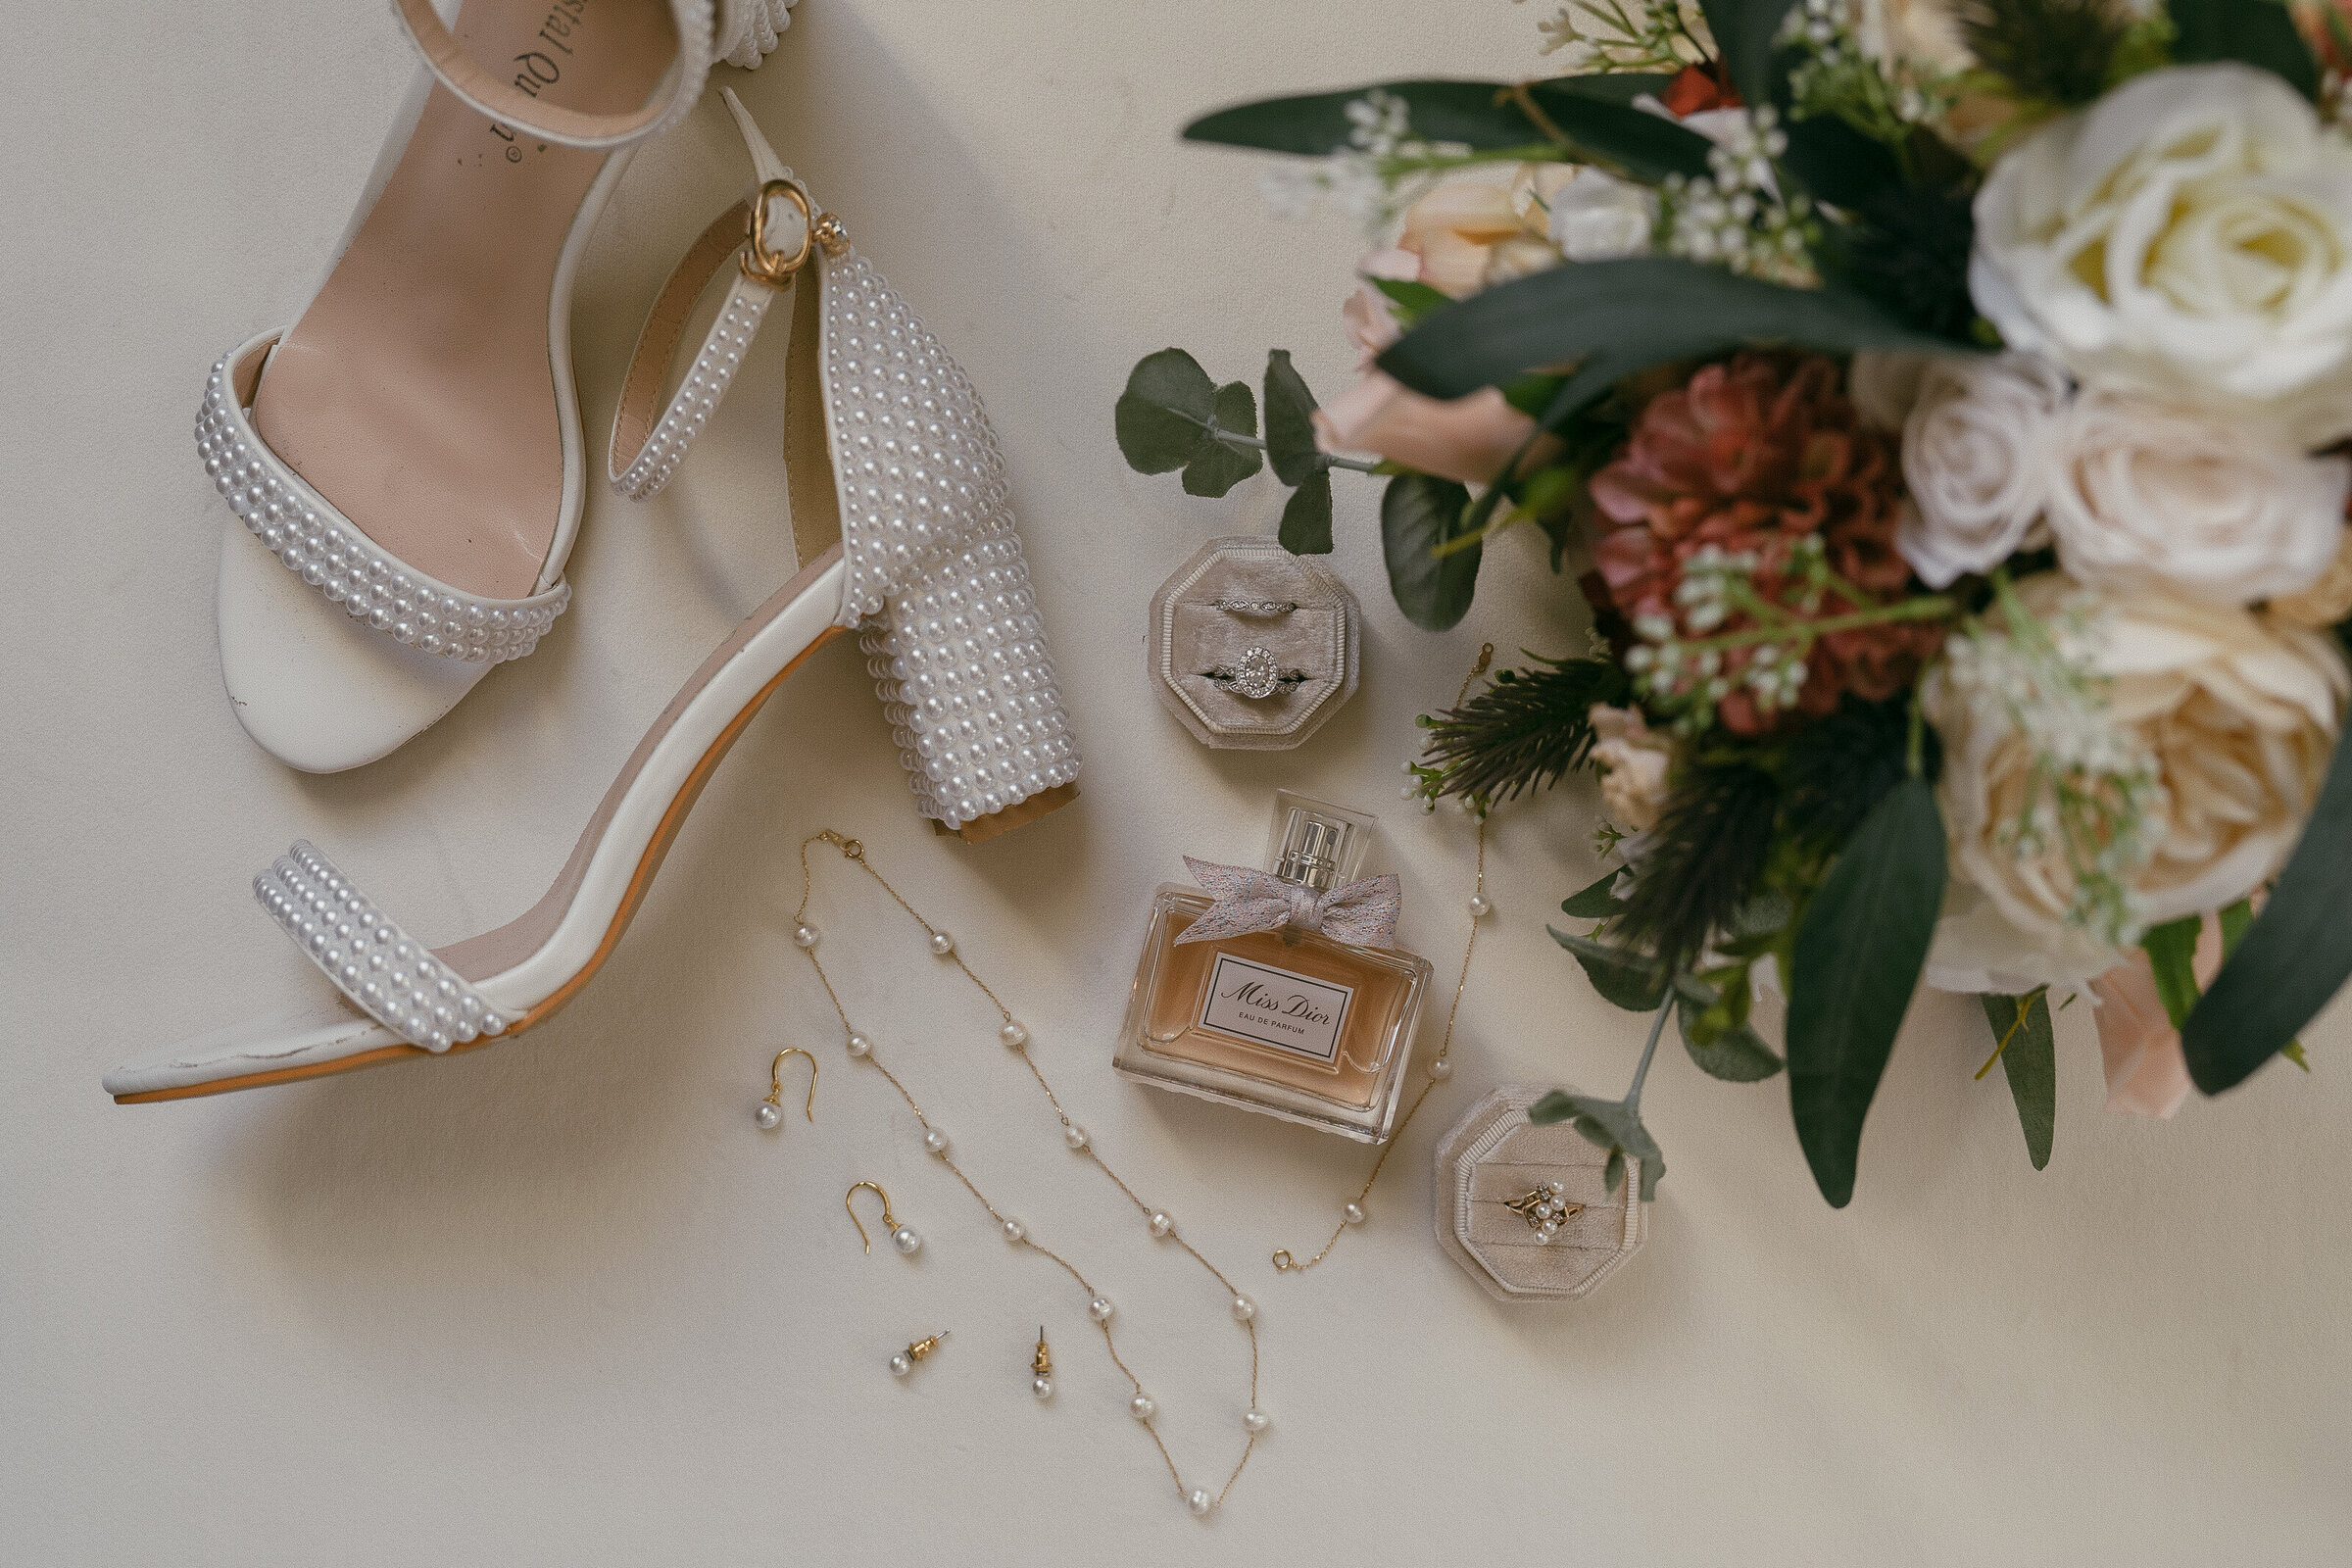 Close-up of bridal shoes and wedding ring among floral decorations.